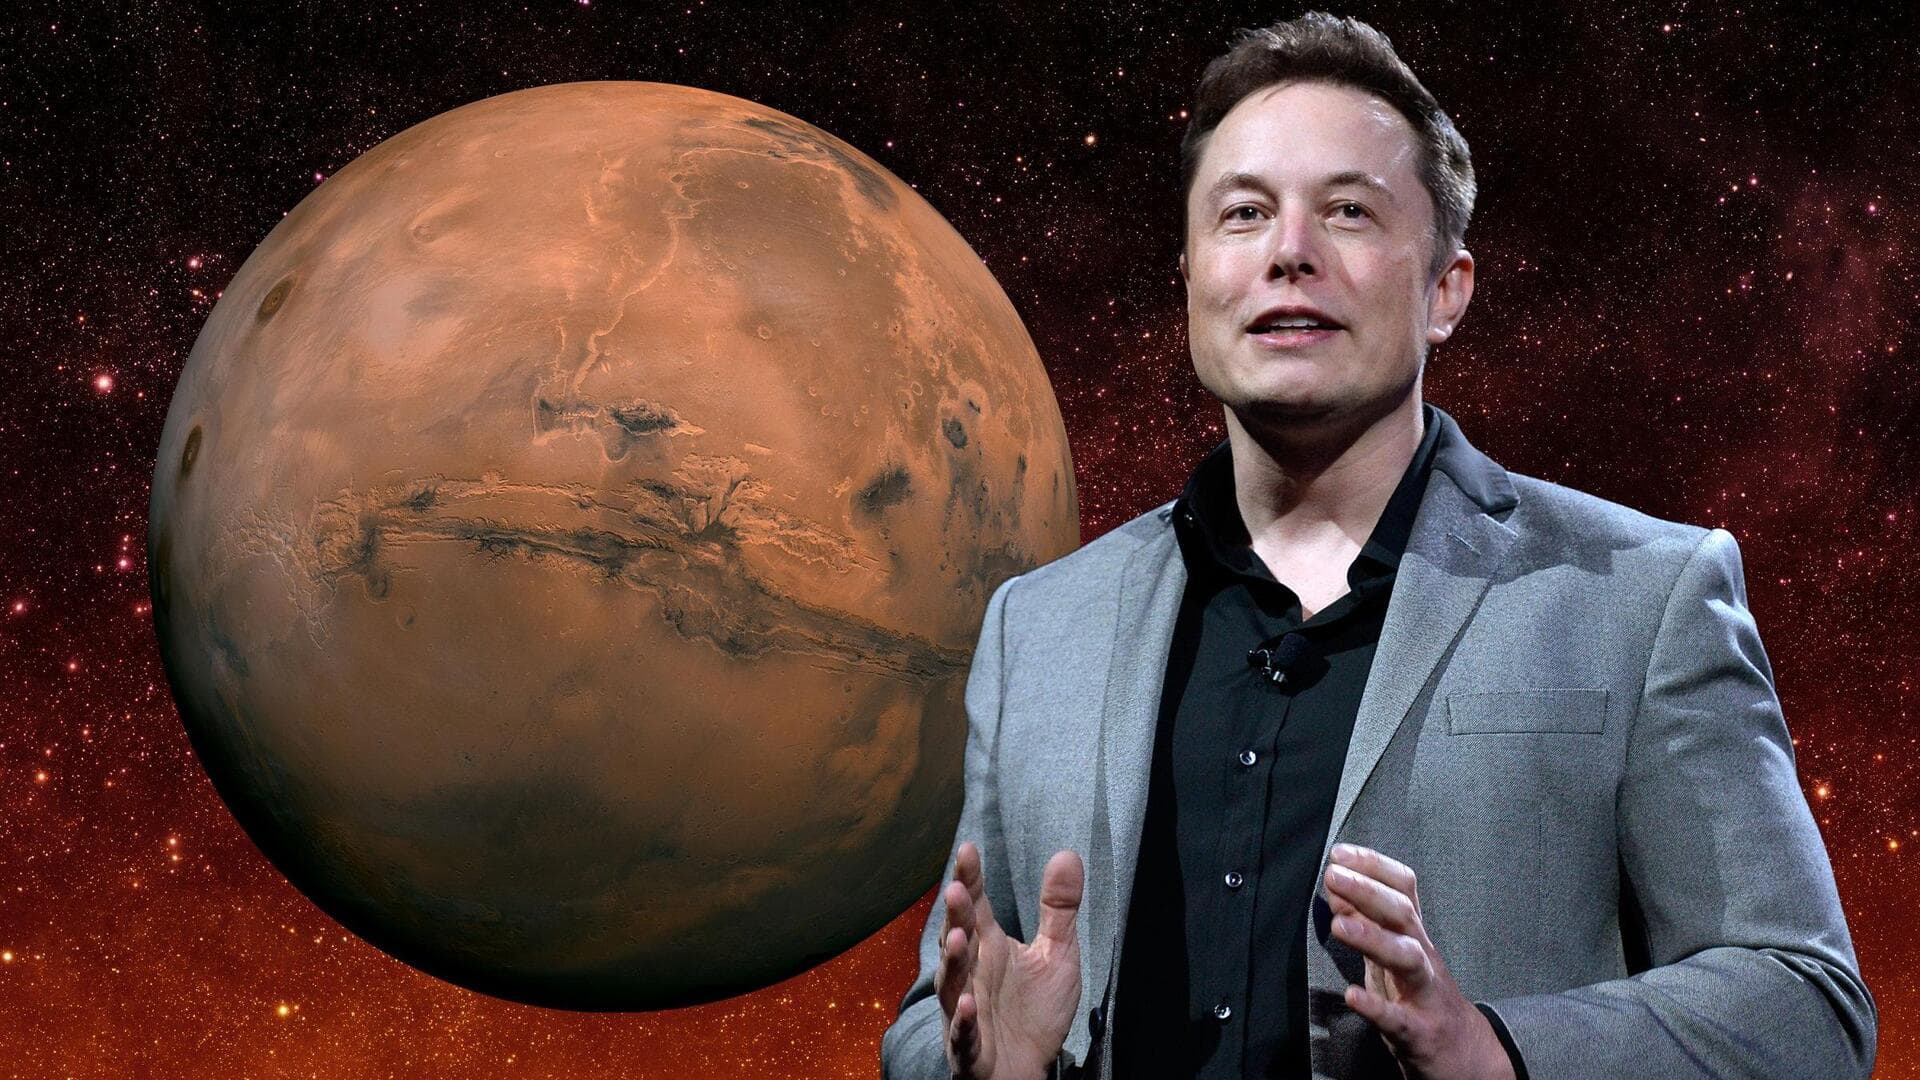 Mapping out plan to colonize Mars, says Elon Musk